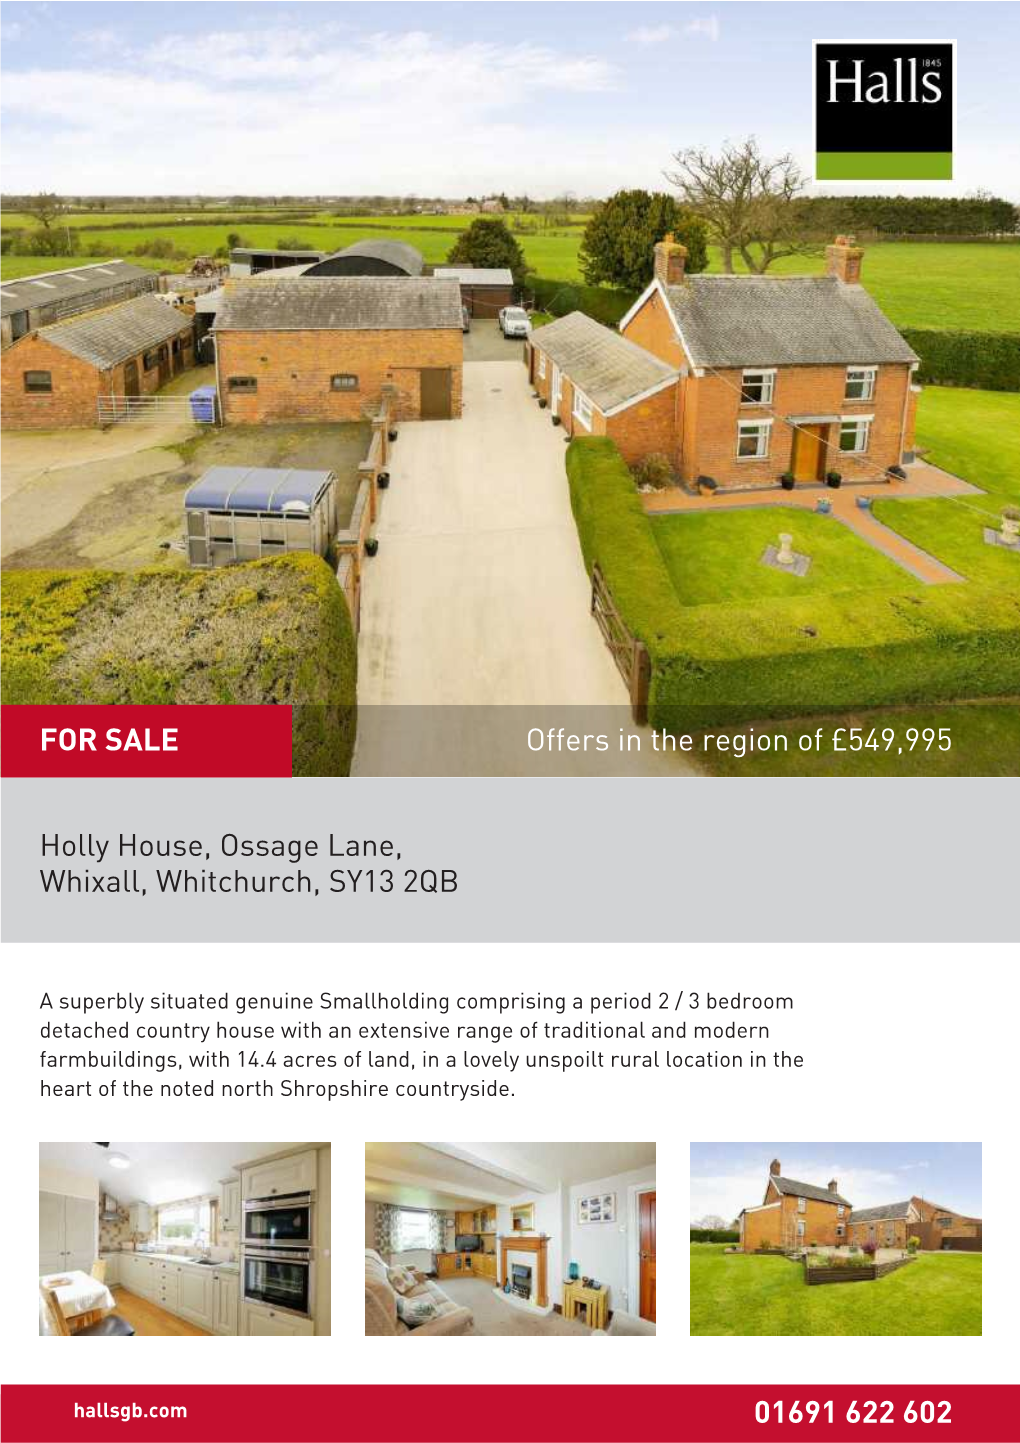 Holly House, Ossage Lane, Whixall, Whitchurch, SY13 2QB